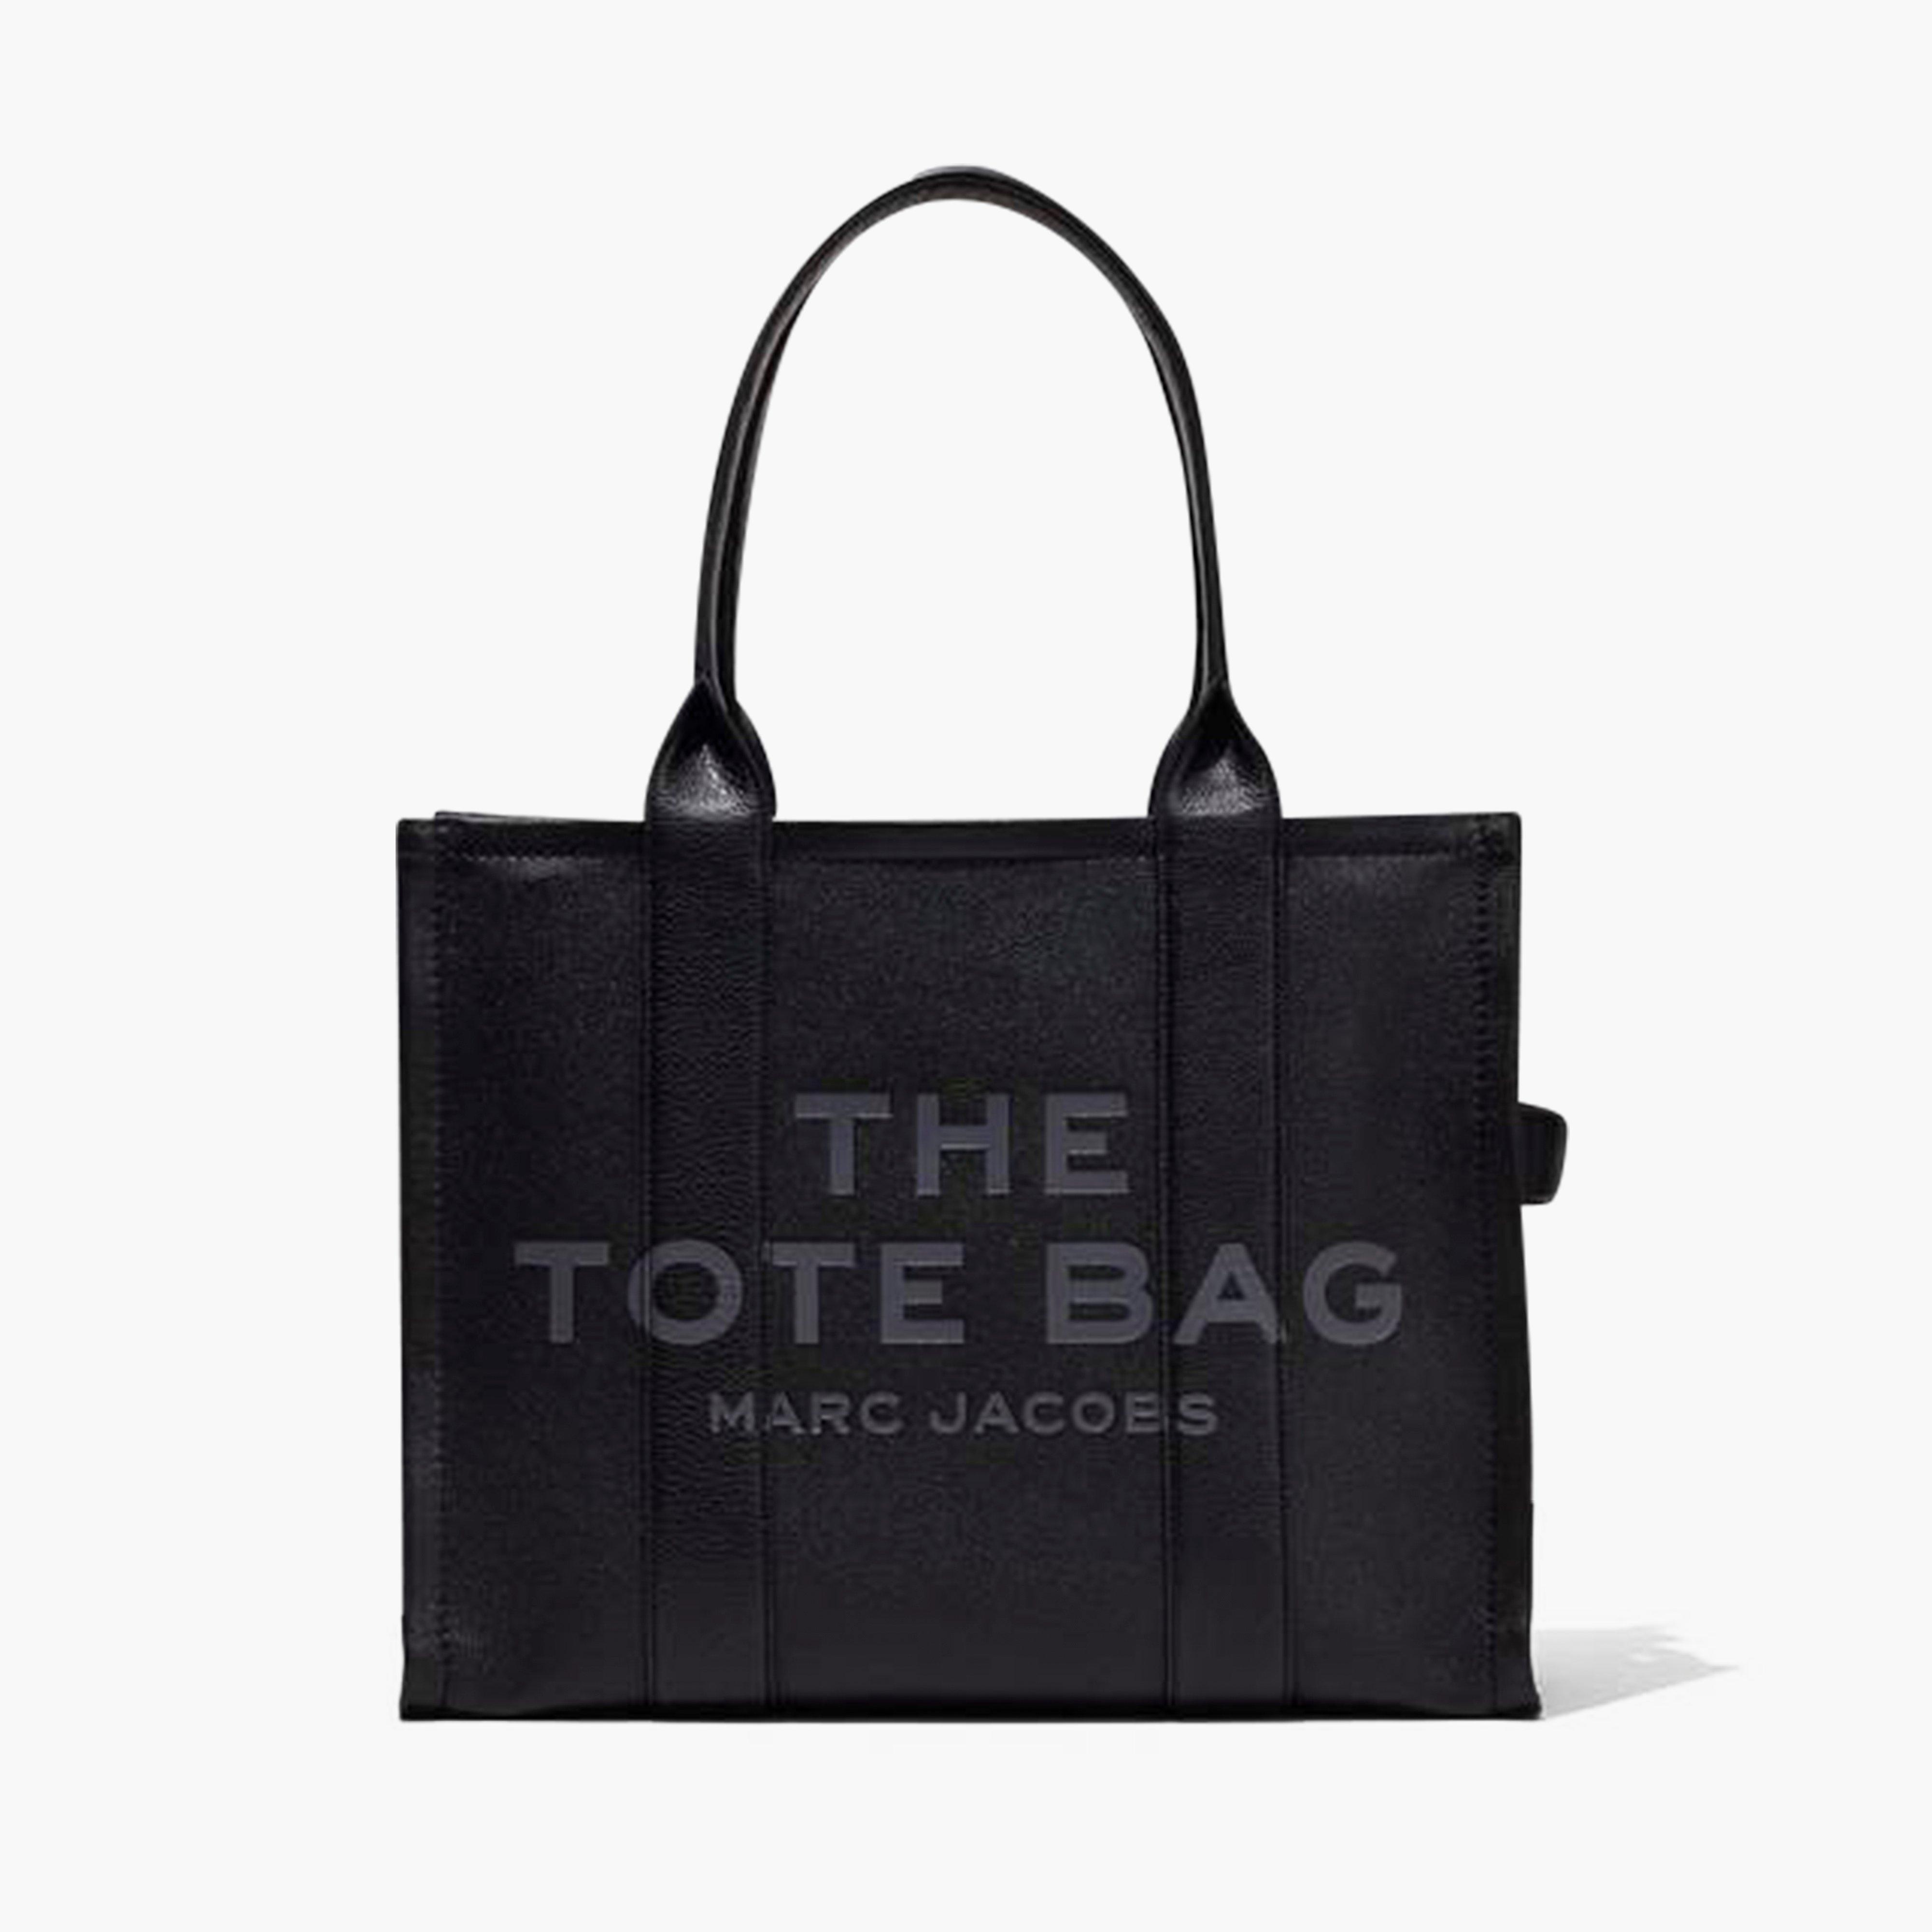 THE LEATHER LARGE TOTE BAG - 1